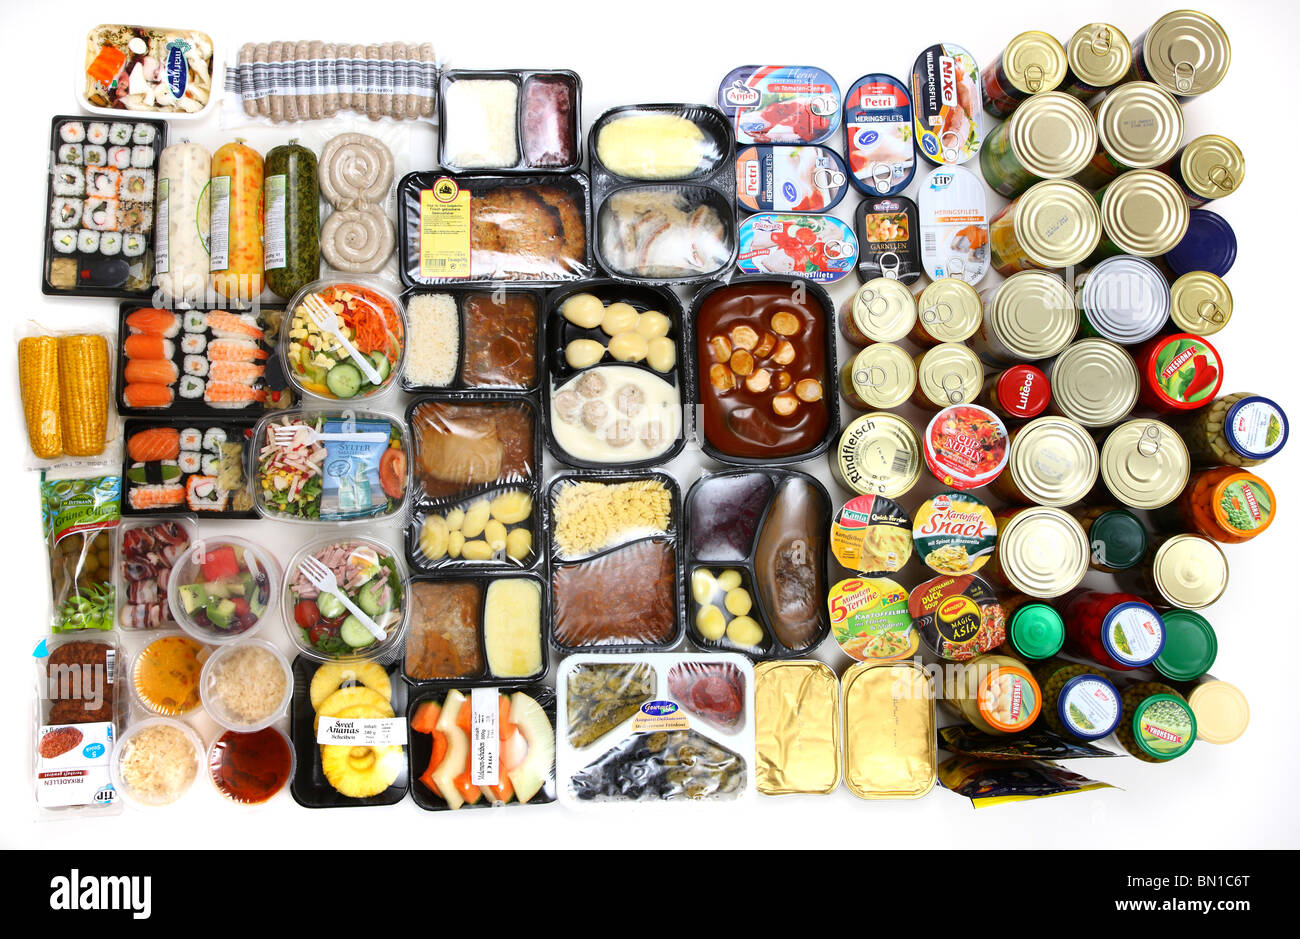 Selection of convenience food. Fresh salads, fruits, meats, soups and pasta dishes in cans, read-to-serve meals, vegetables. Stock Photo